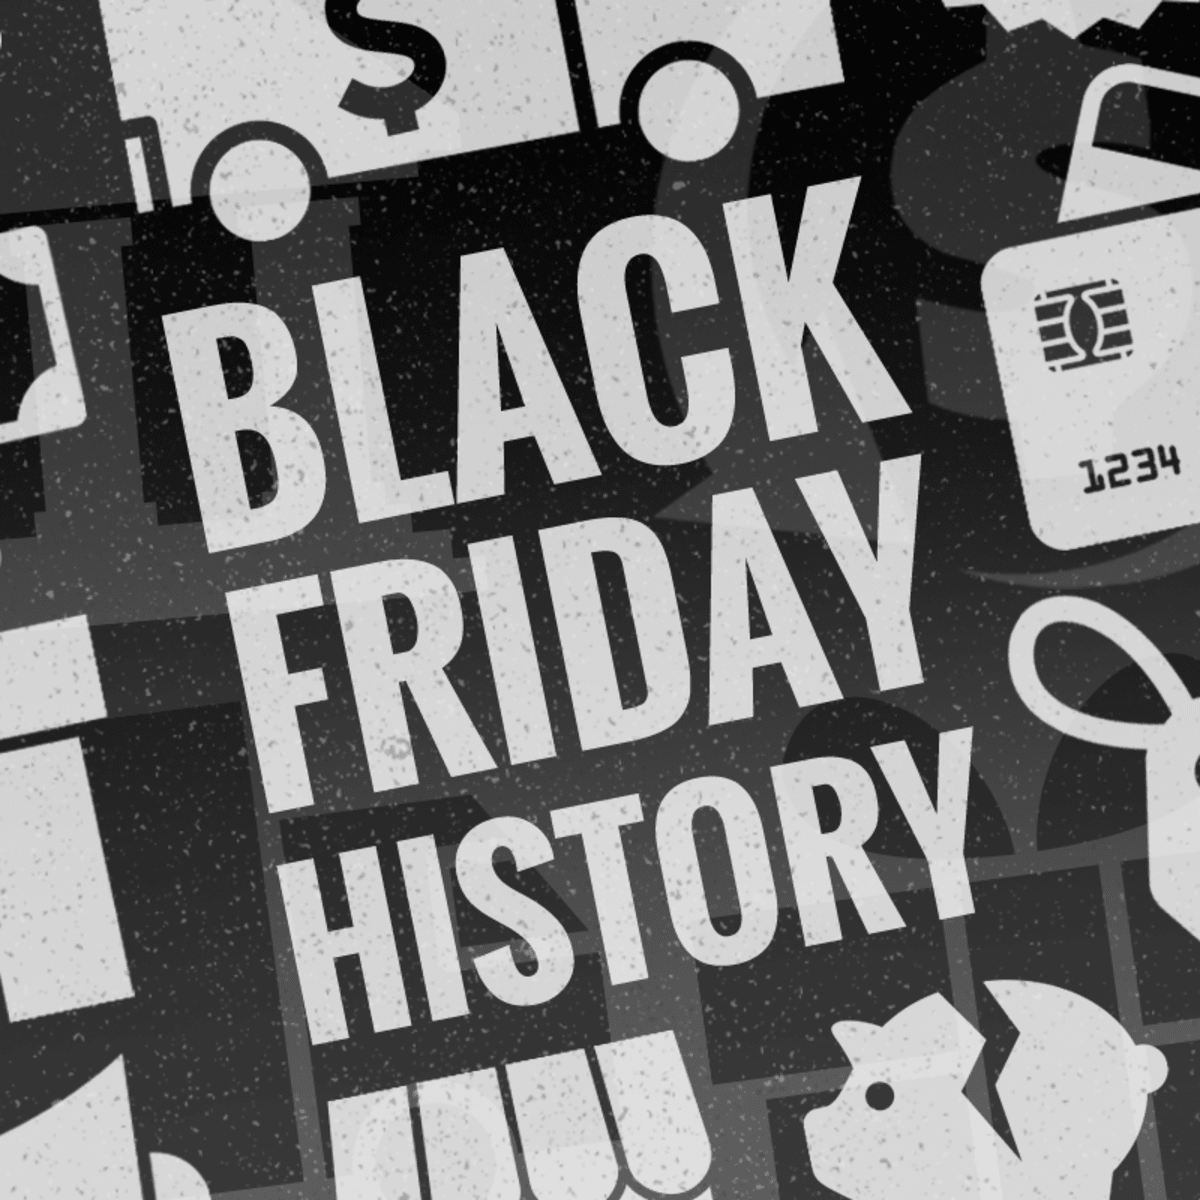 What Are The Origins Of The Black Friday Sale?